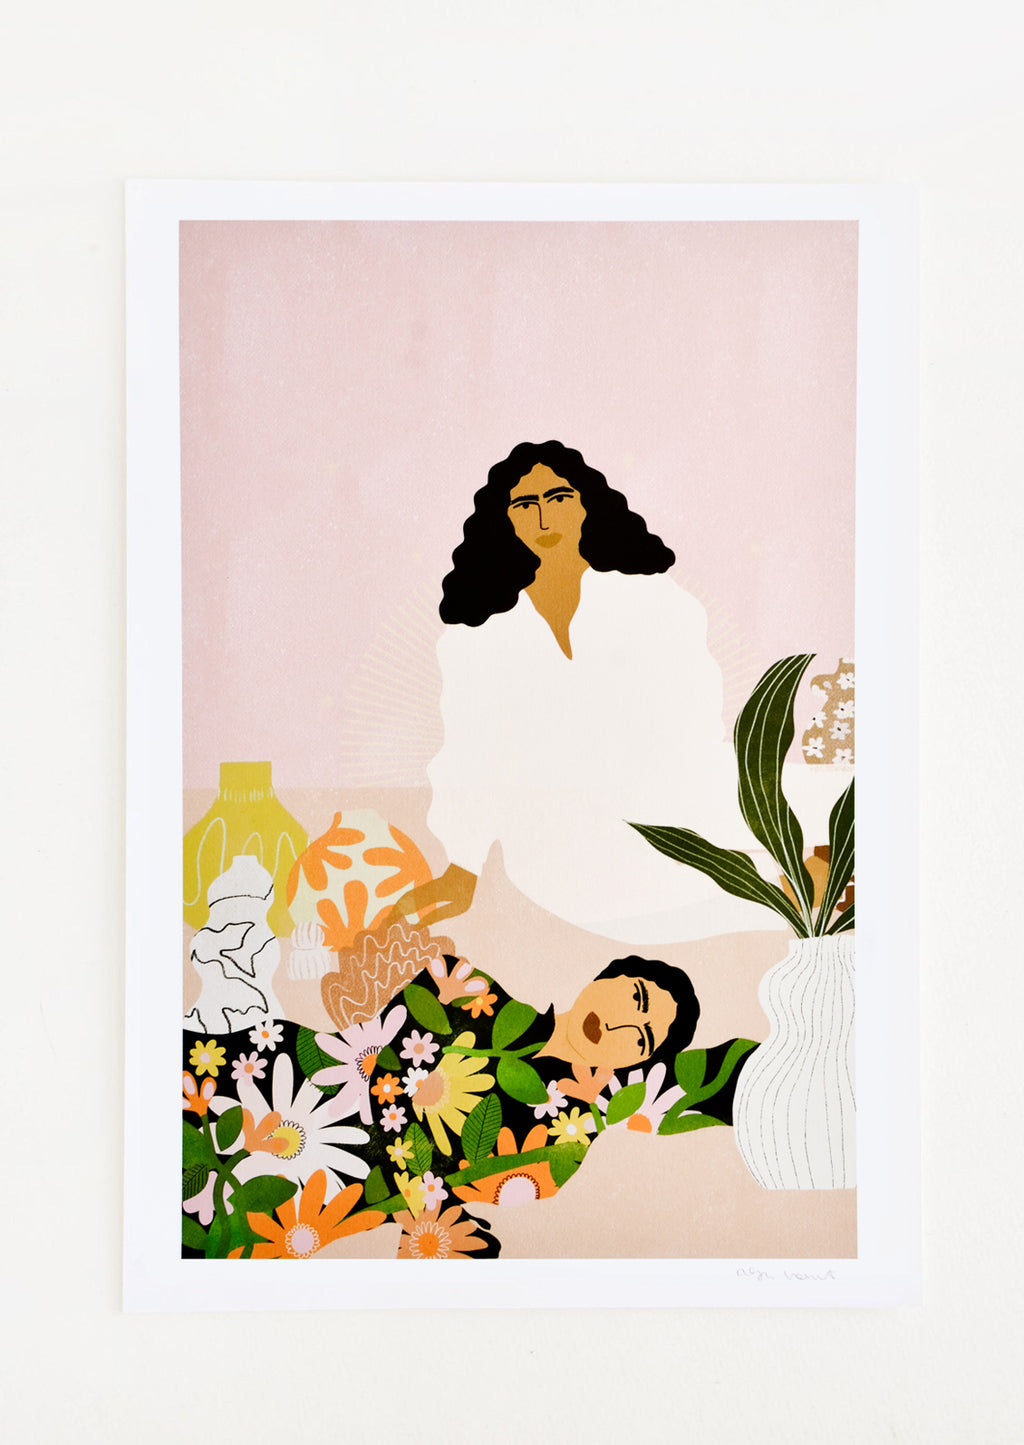 1: Digital art print with pink background and two woman lounging amongst pots and vases.